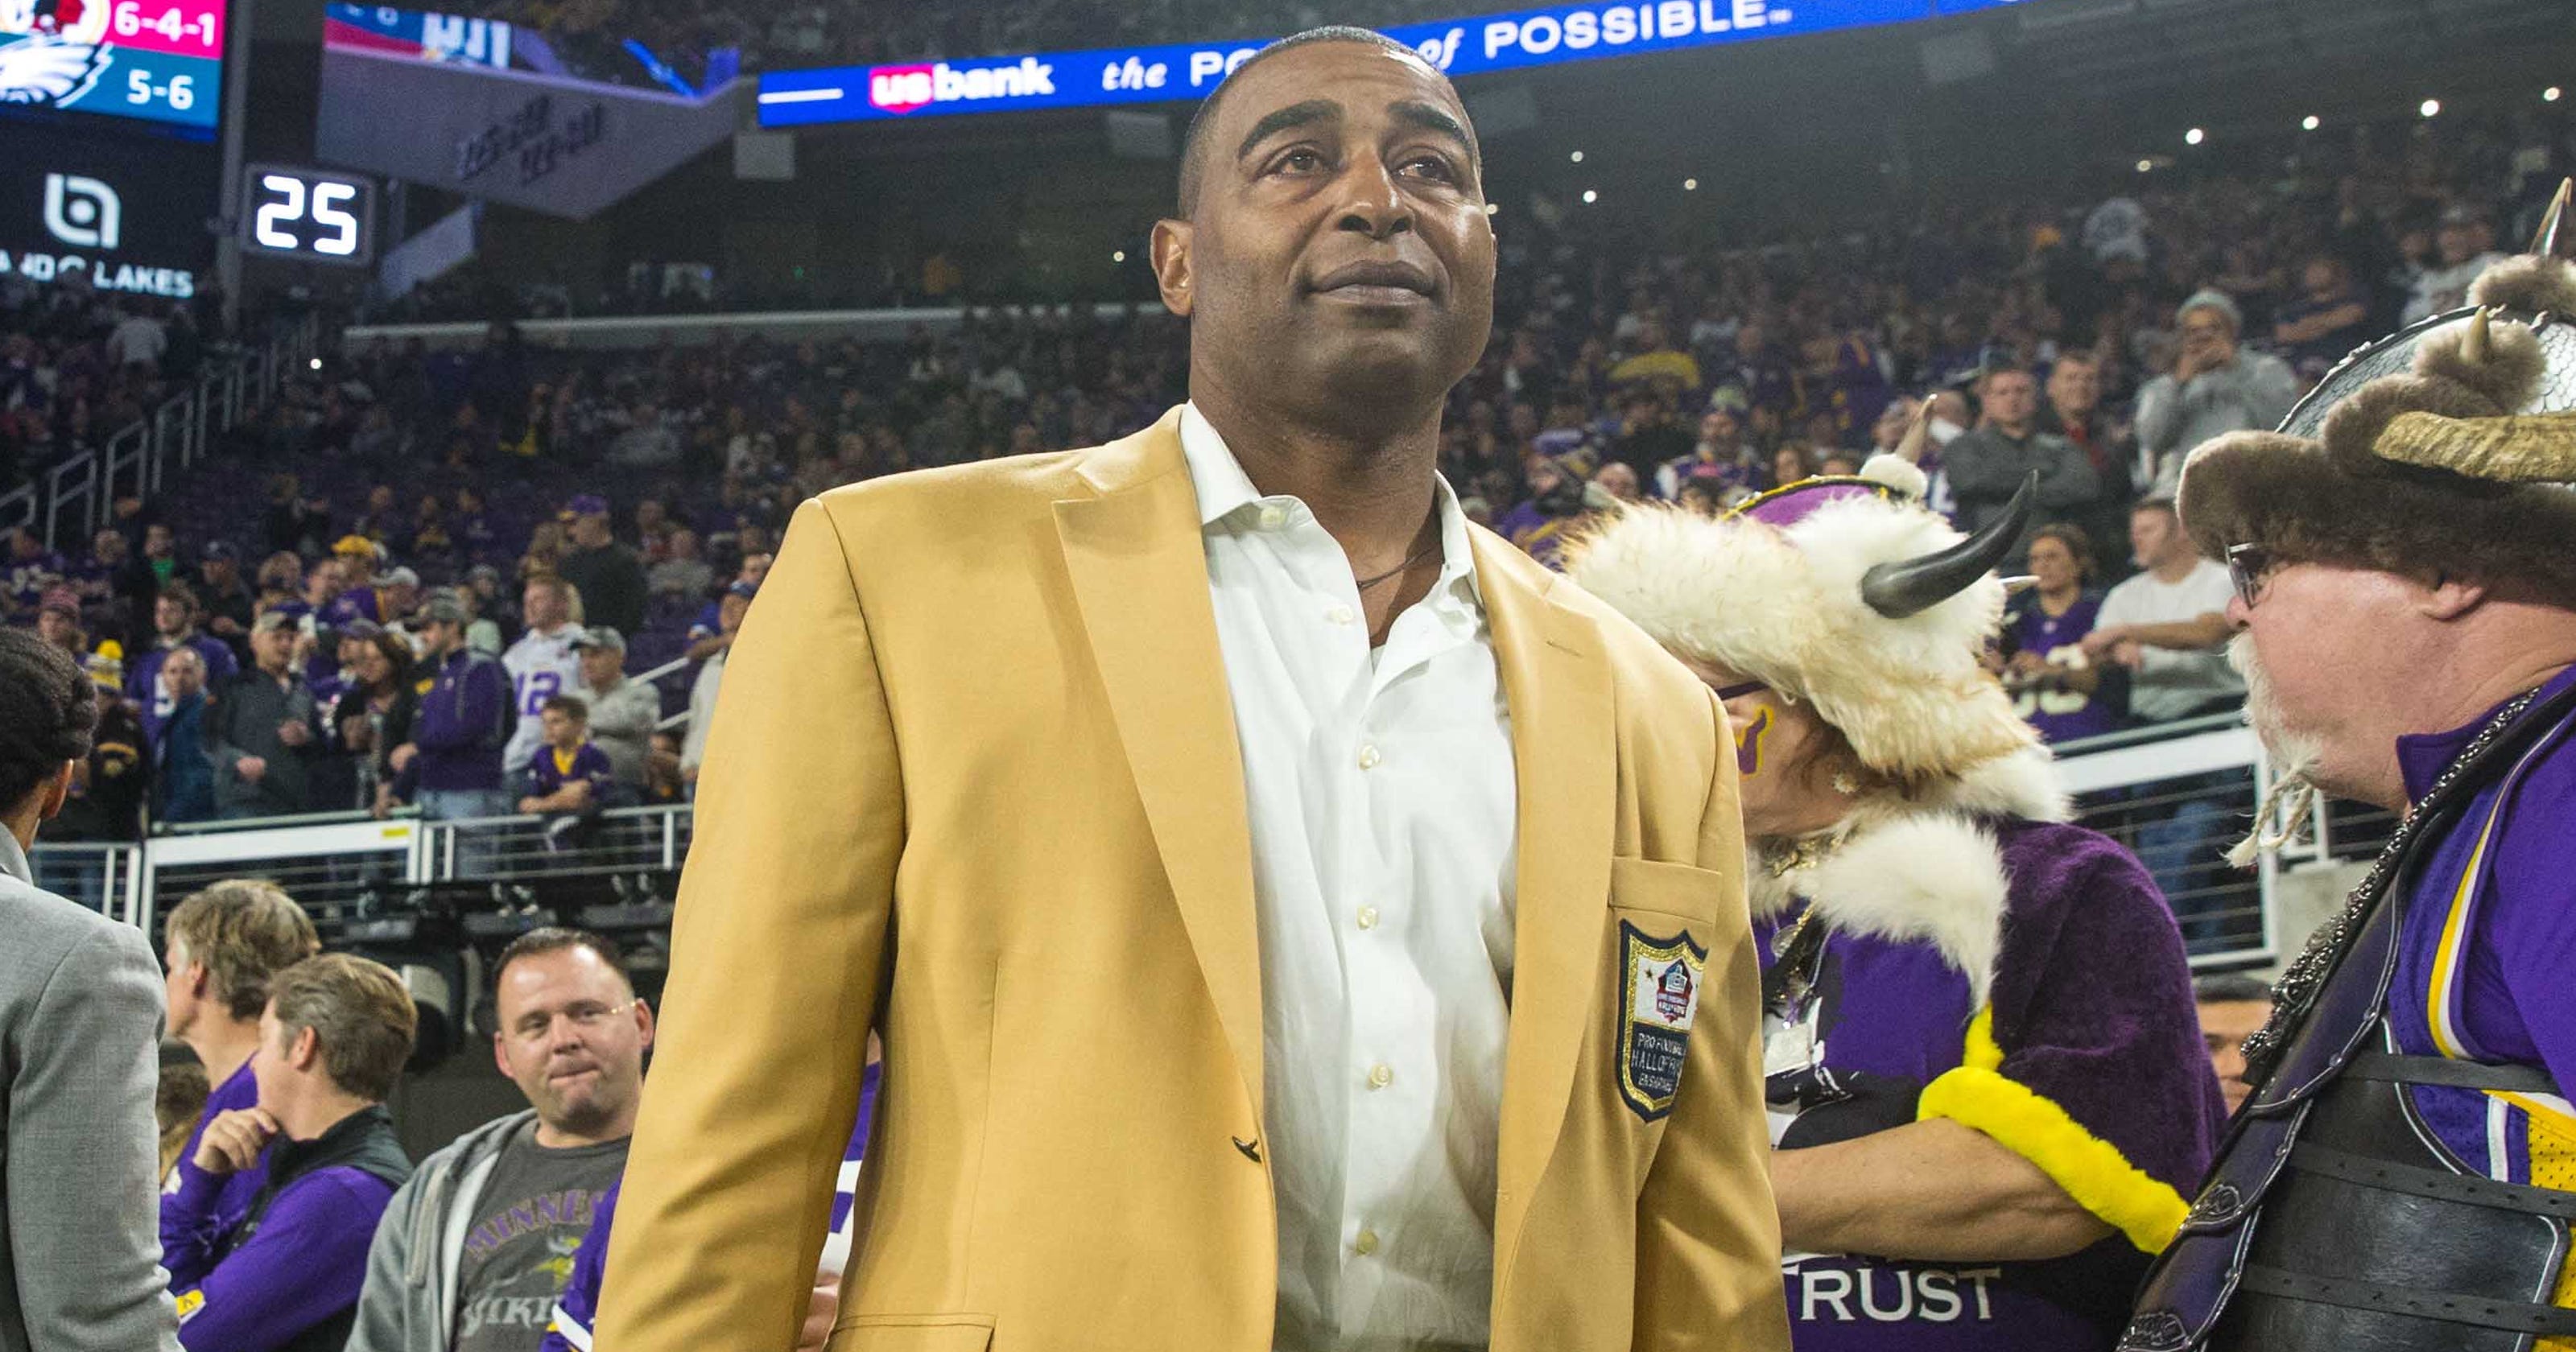 Former ESPN talent Cris Carter to join Fox Sports as NFL analyst3200 x 1680